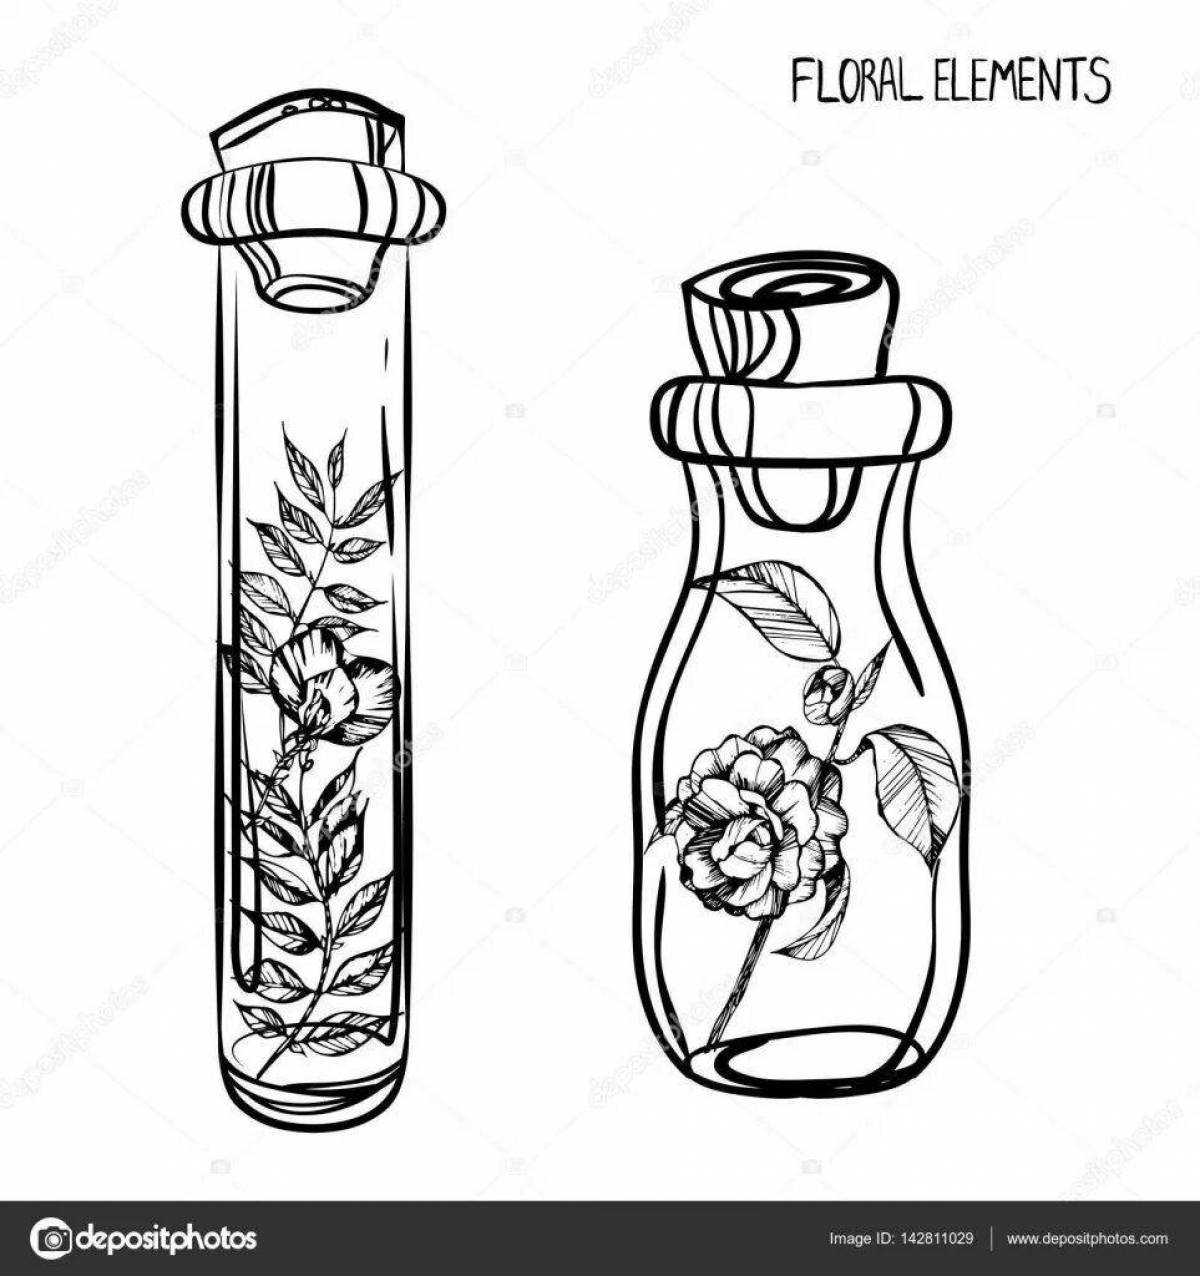 Intriguing coloring potion in a bottle